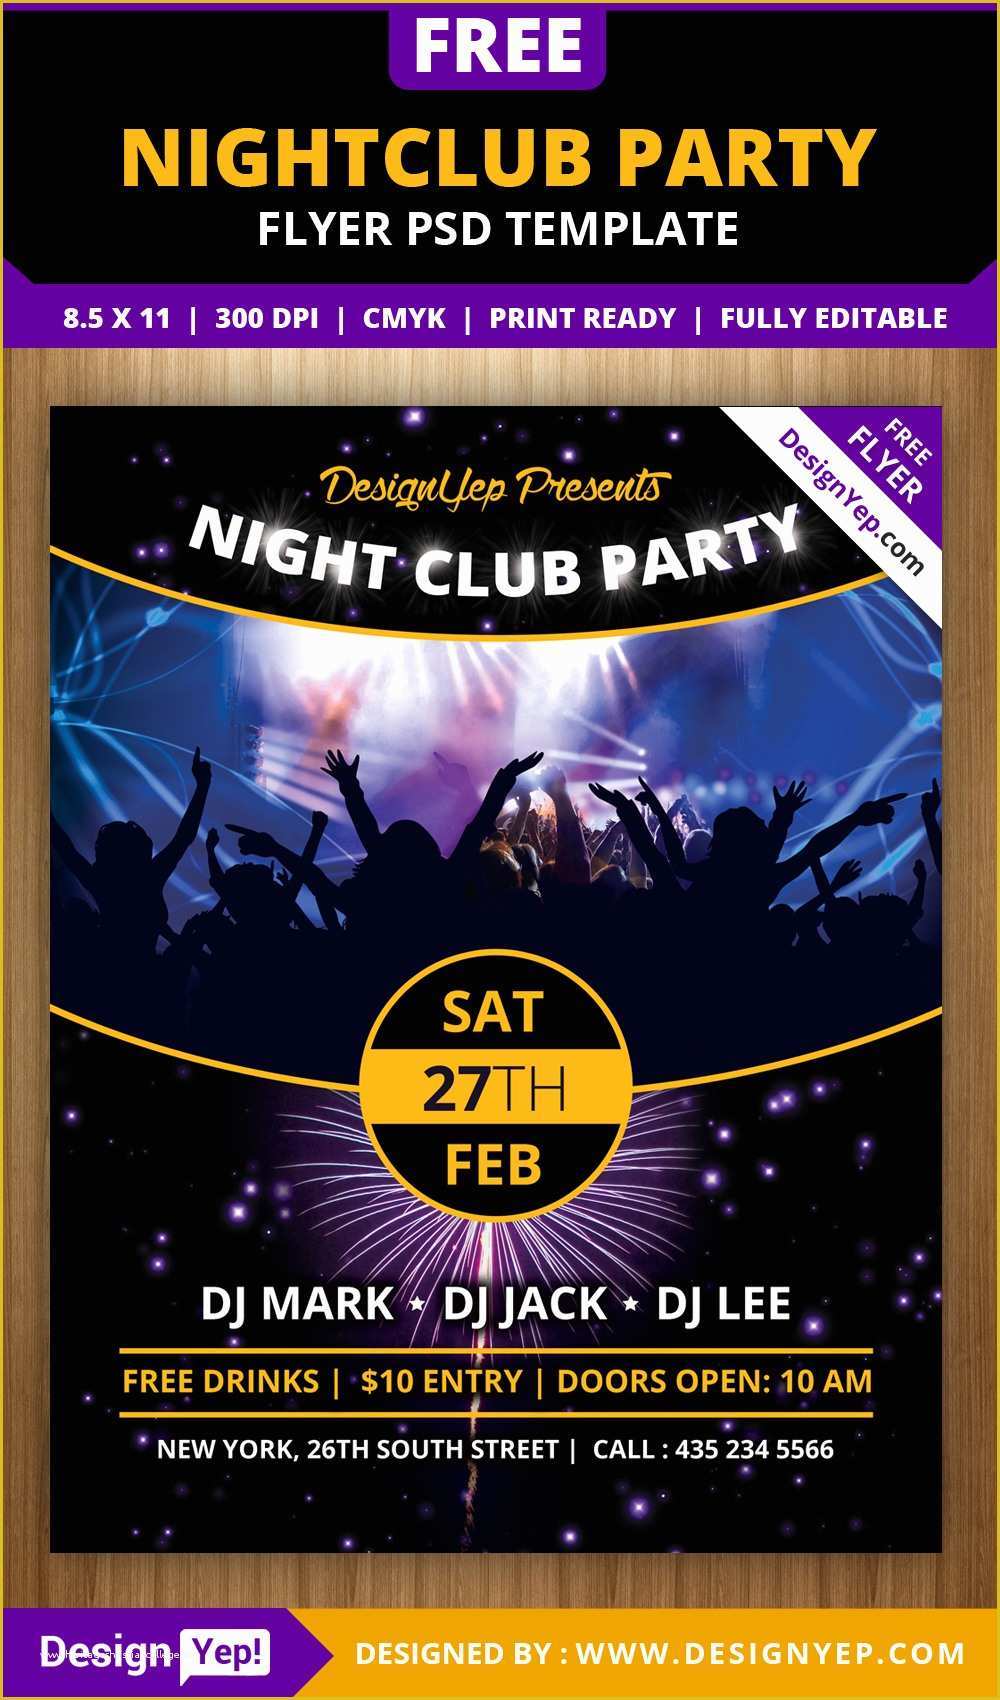 Free Party Flyer Templates Of Free Nightclub Party Flyer Psd Template Designyep